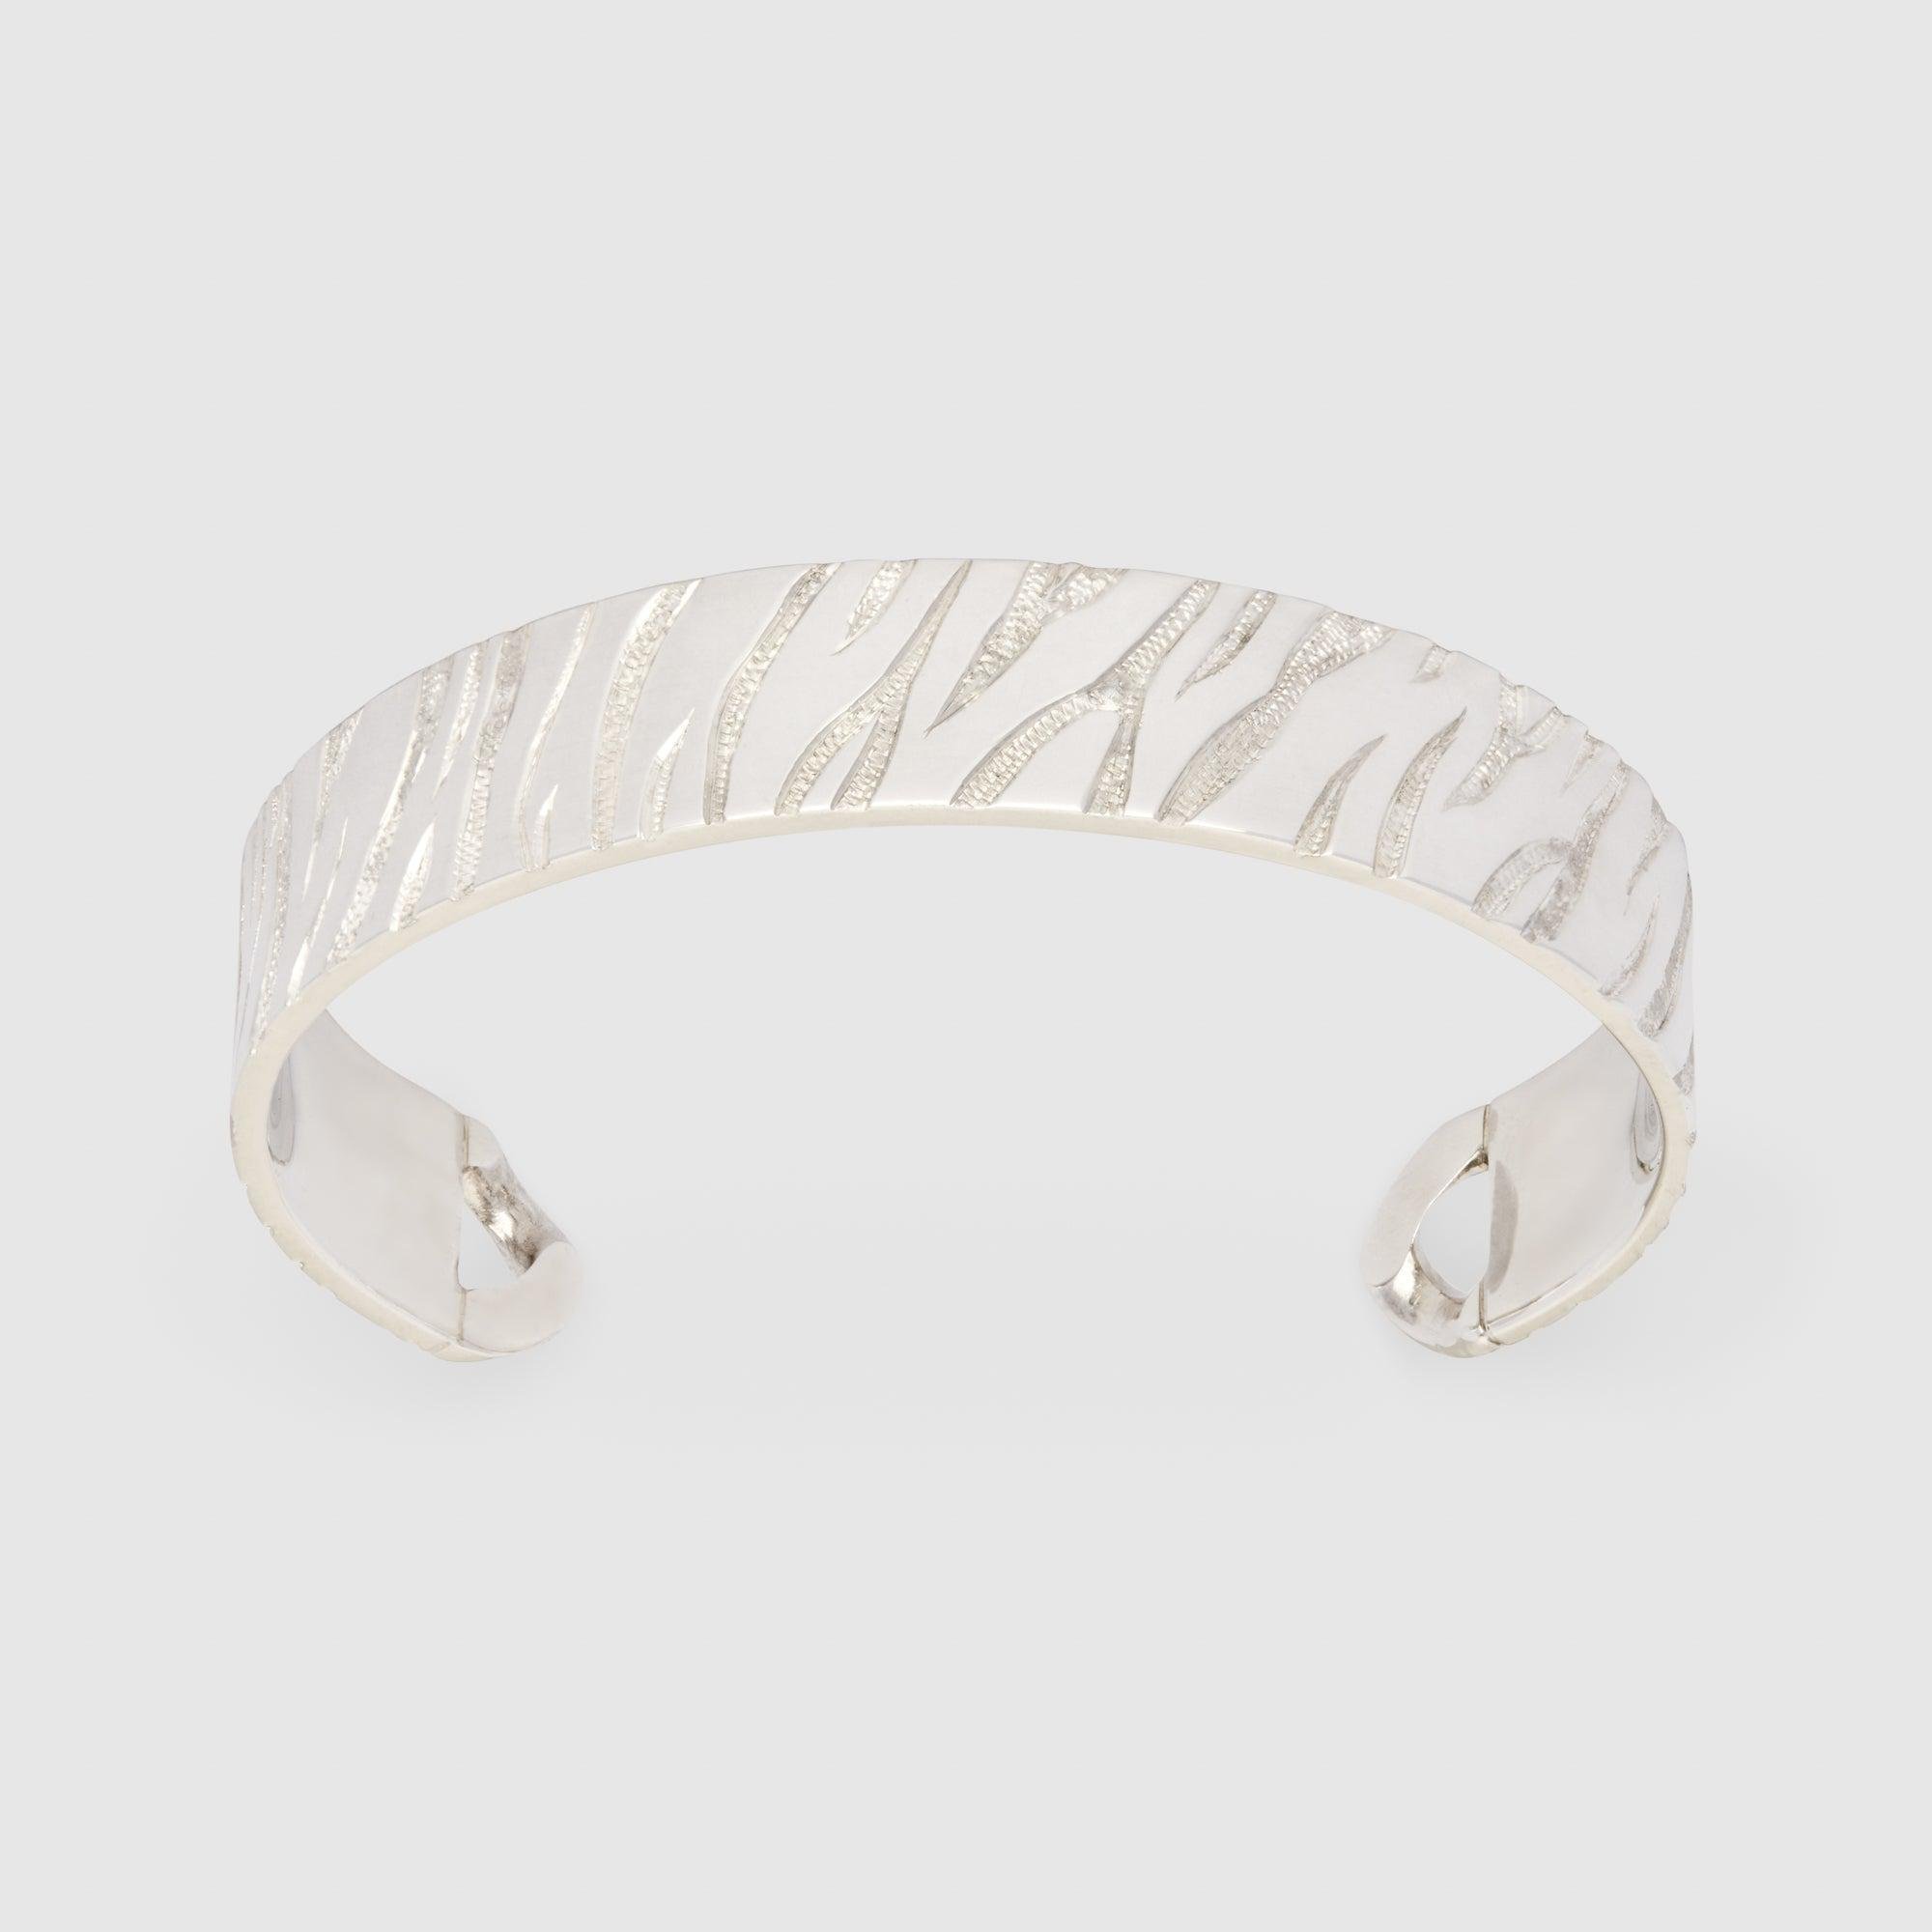 Bunney - DSM Exclusive ID Tiger Bar Cuff Silver by ANDREW BUNNEY